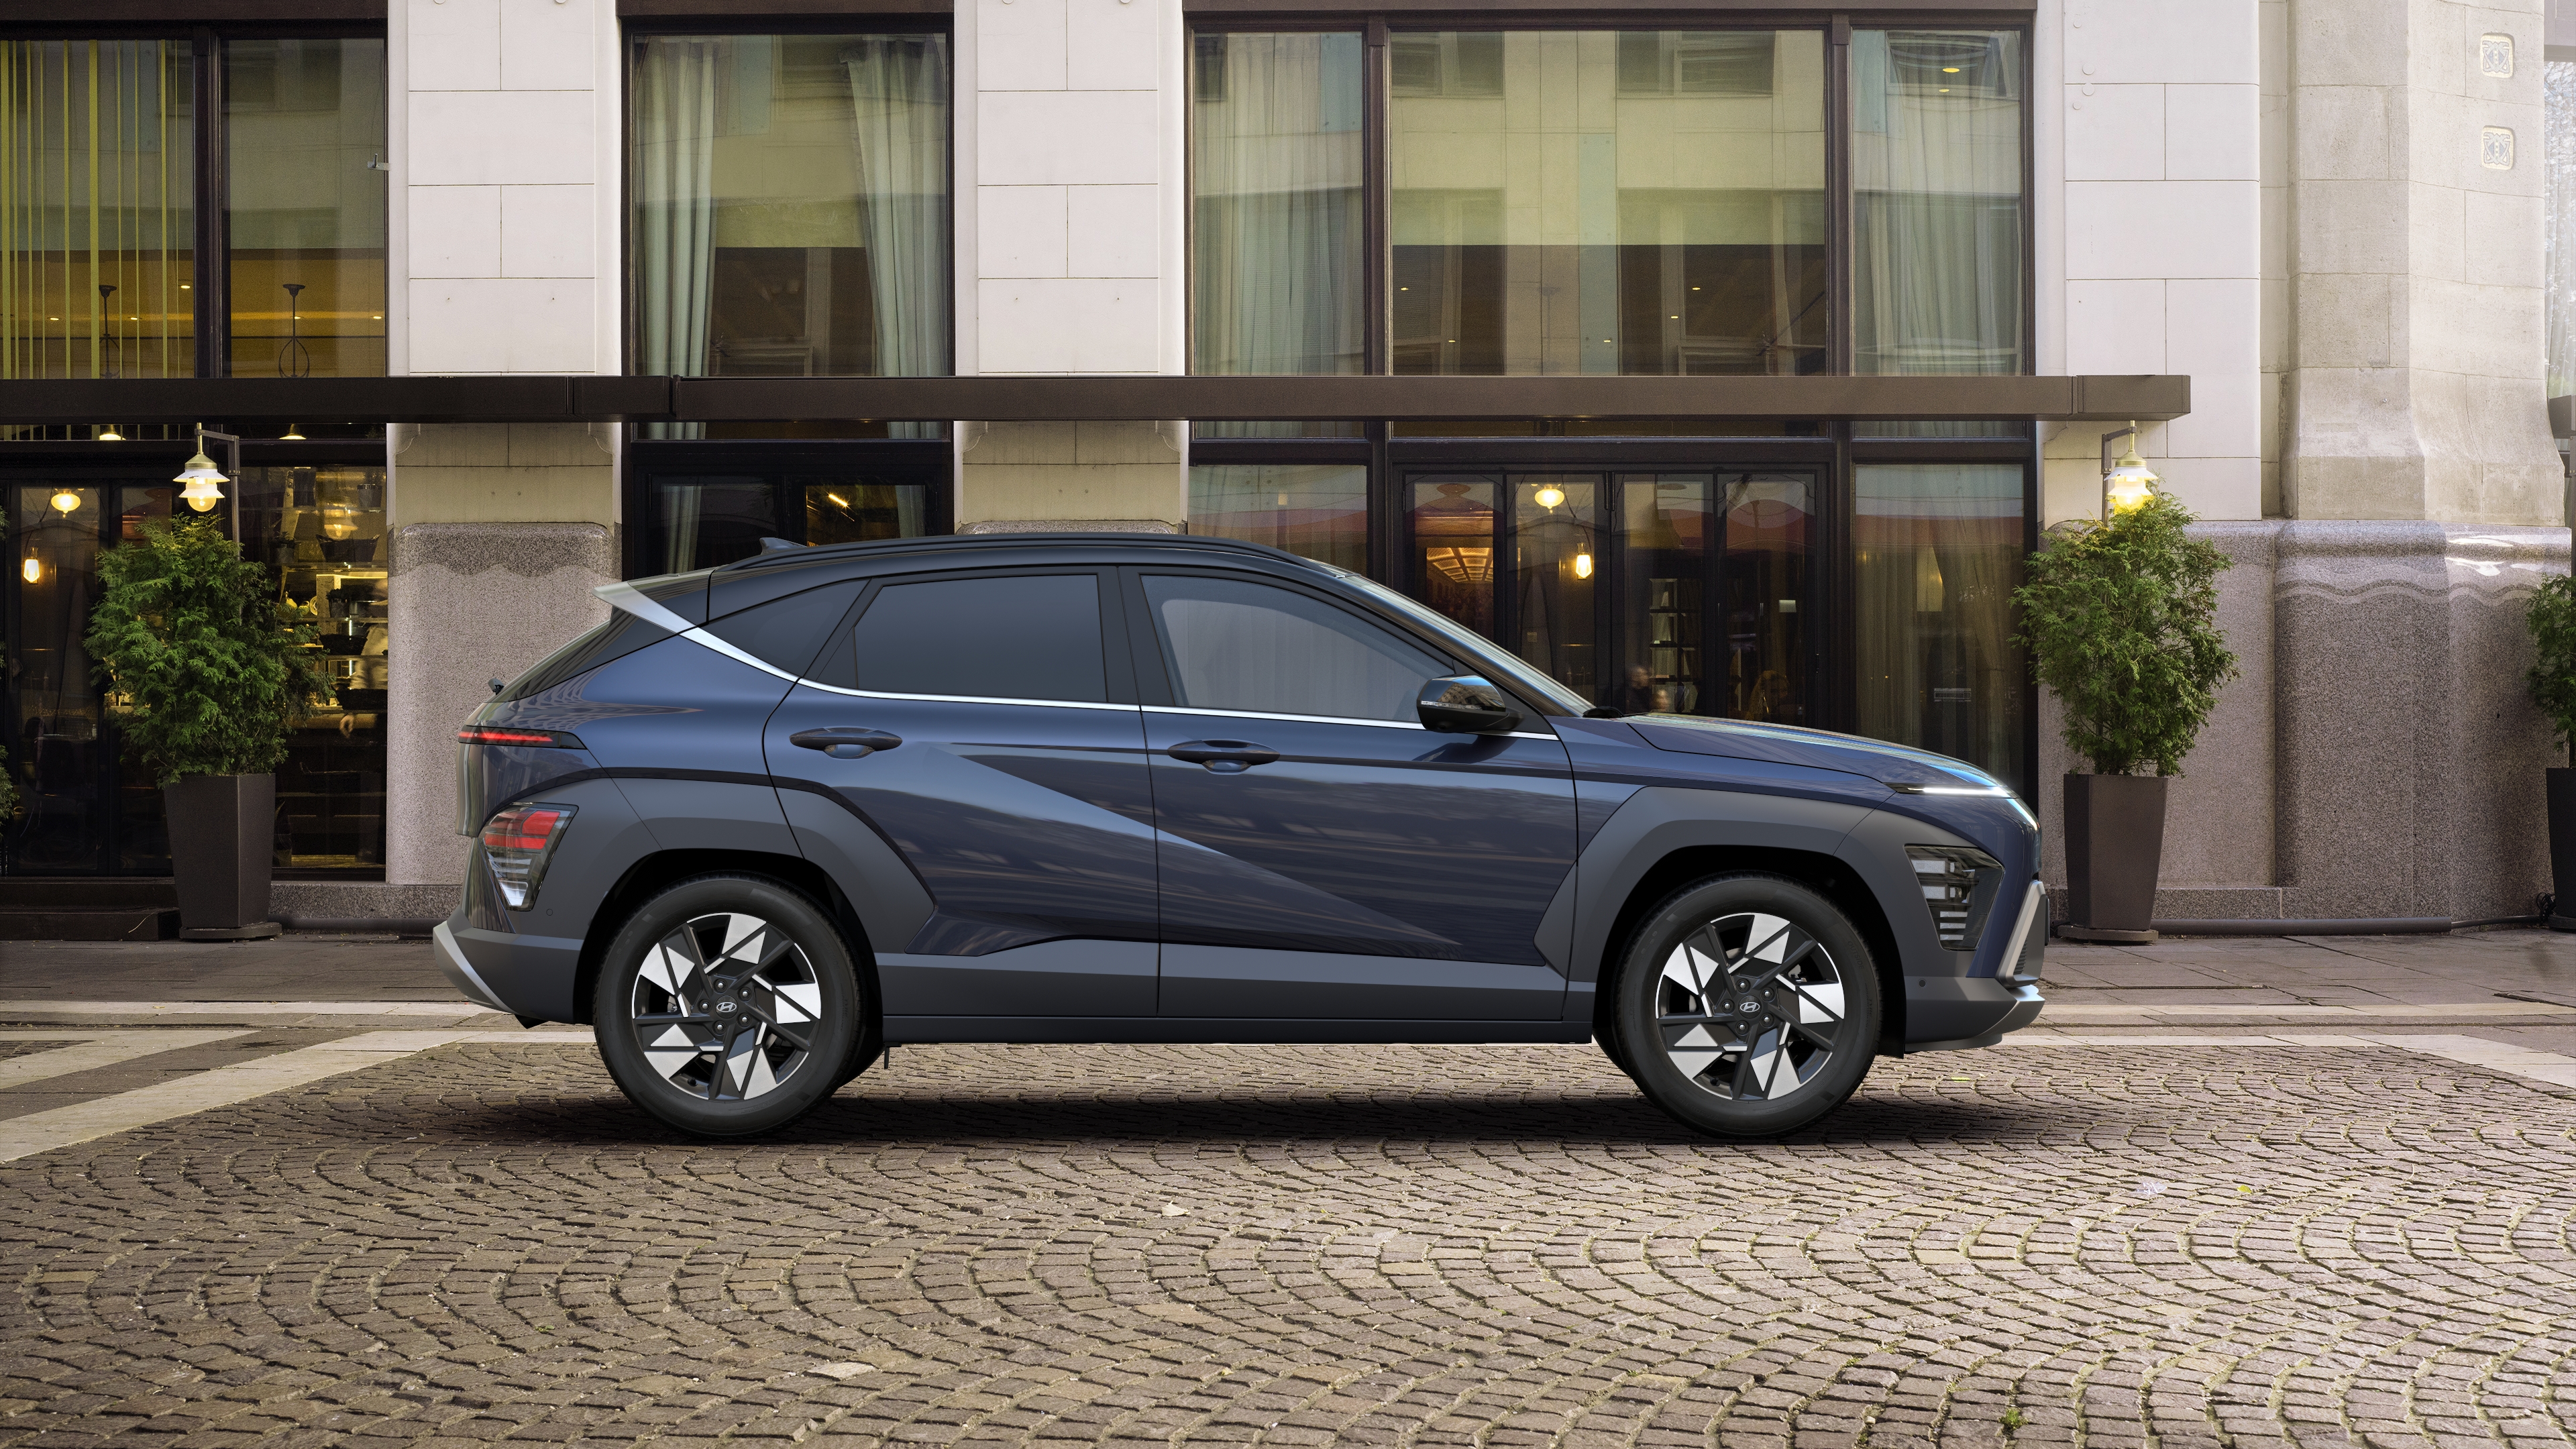 	 The all-new Hyundai KONA Hybrid pictured from the side showing one of its wheels.